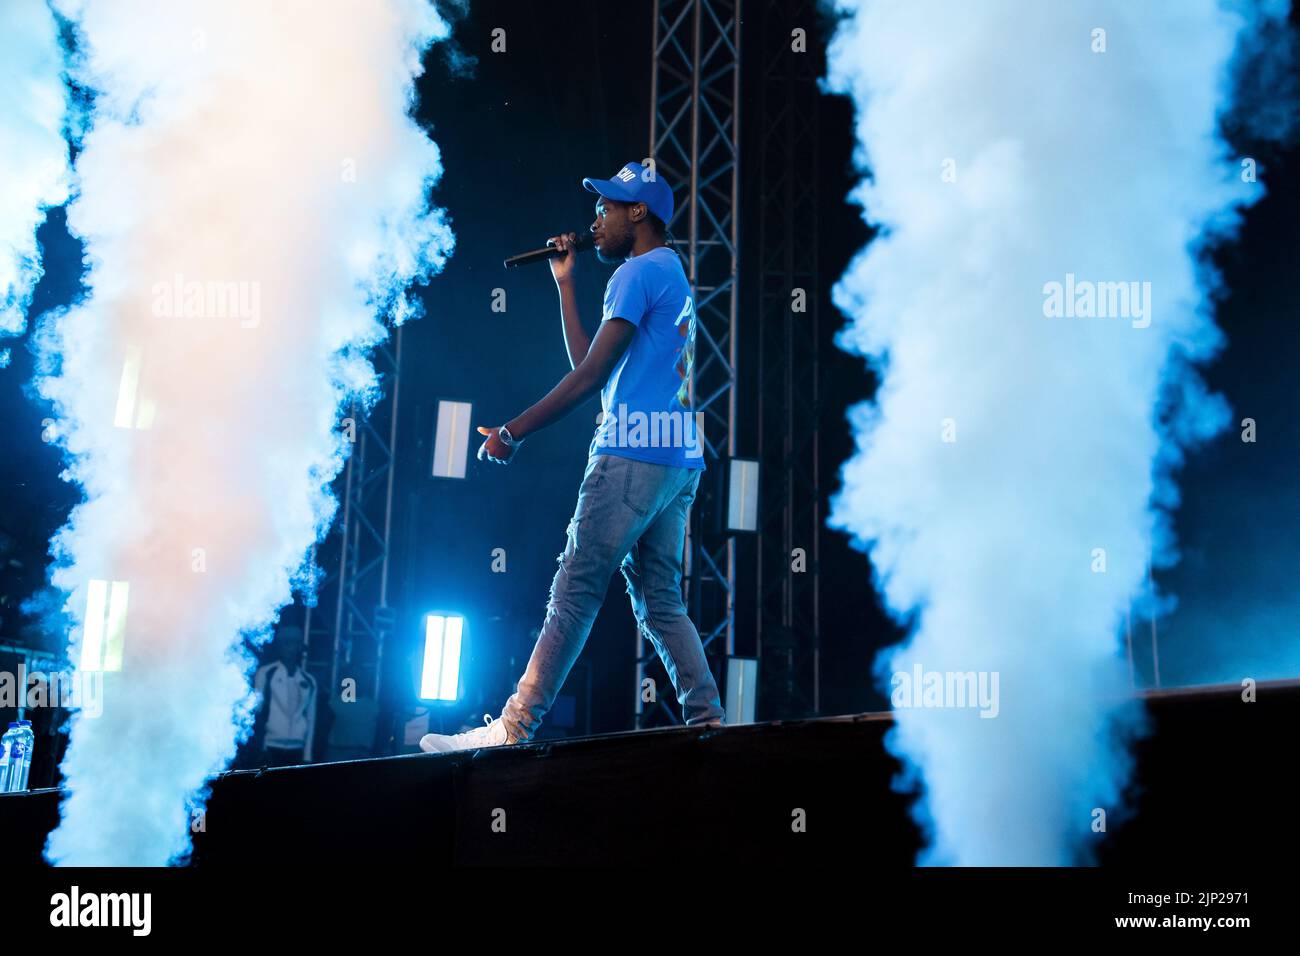 Rapper Dave performs during Swedish music festival Way Out West 2022 in Gothenburg, Sweden, August 13, 2022.Photo: Anders Deros / Aftonbladet / TT cod Stock Photo